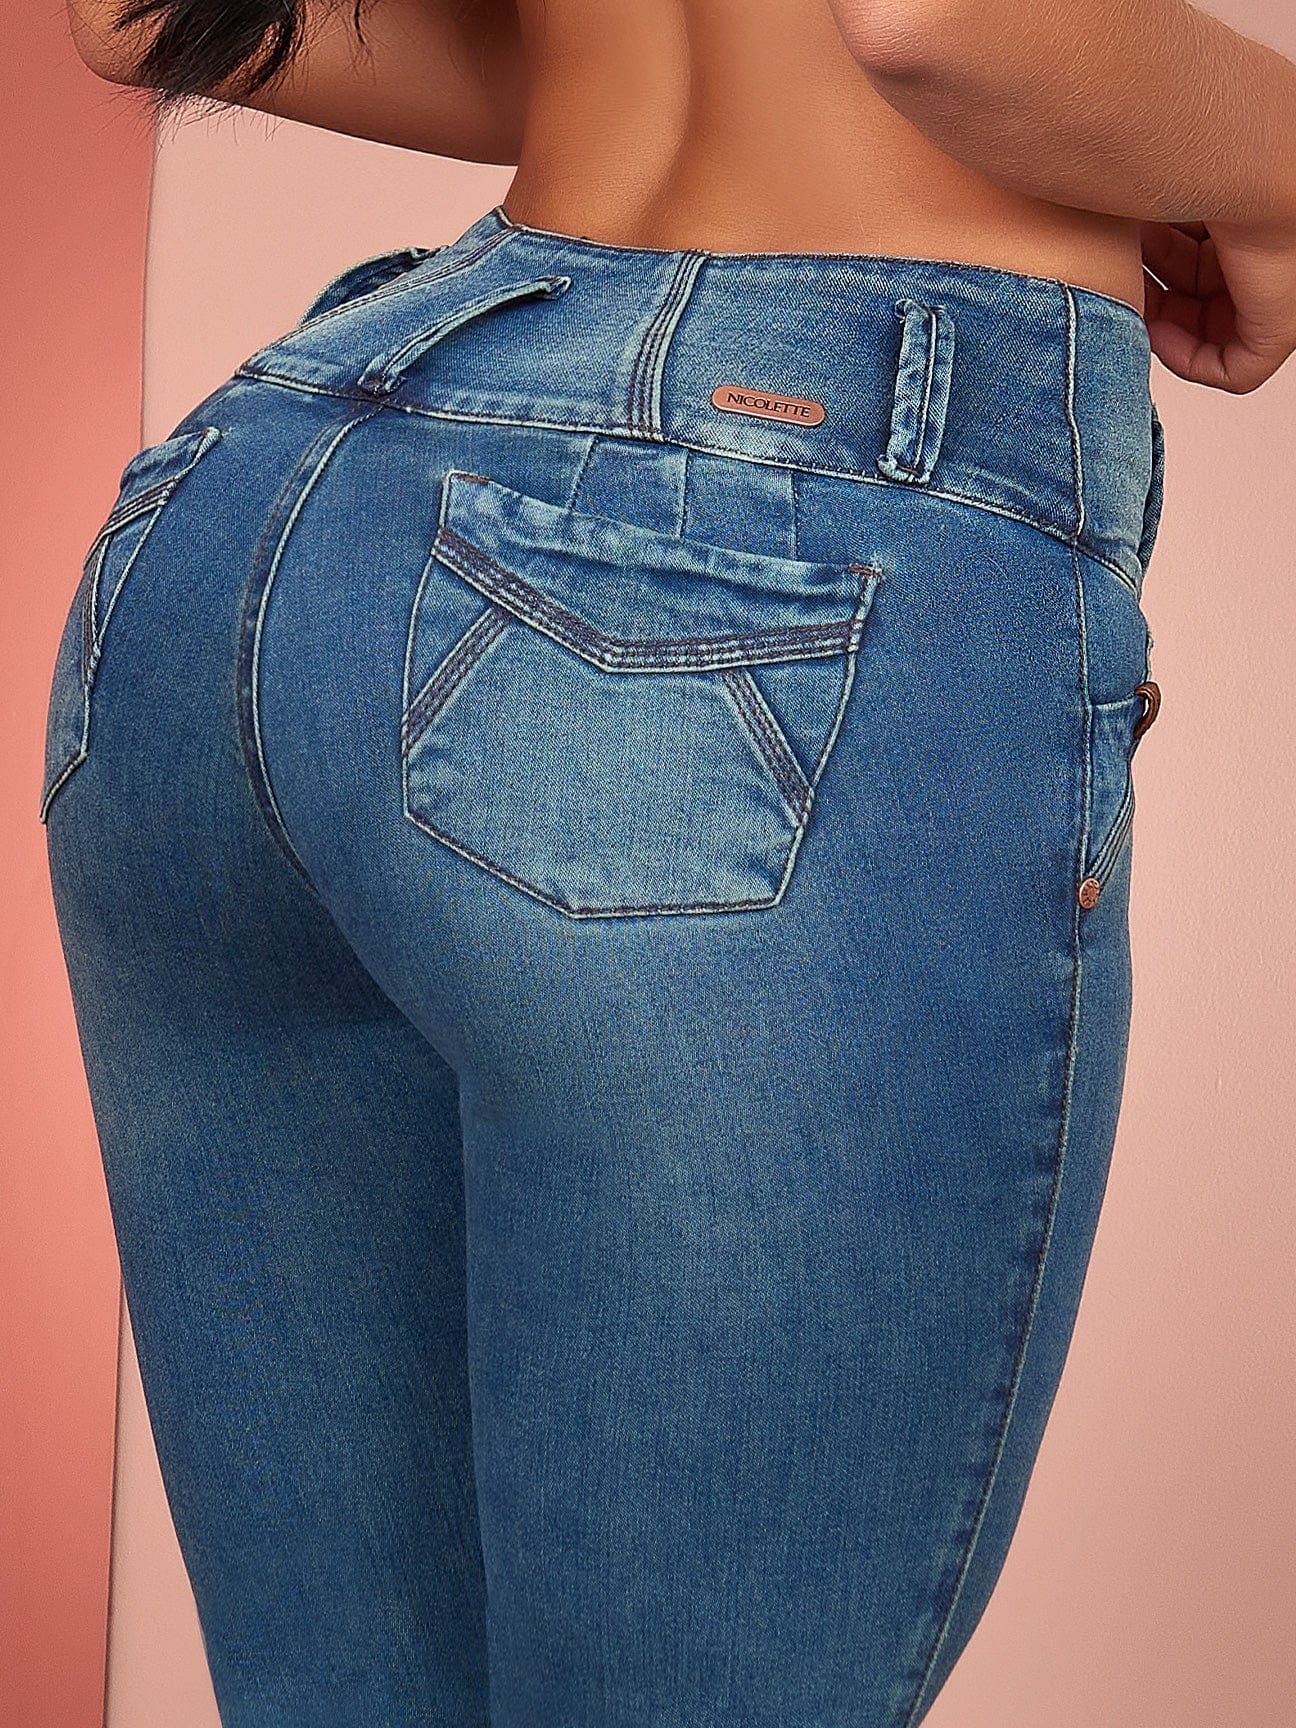 Outlaw Butt Lift Skinny Jeans 12900